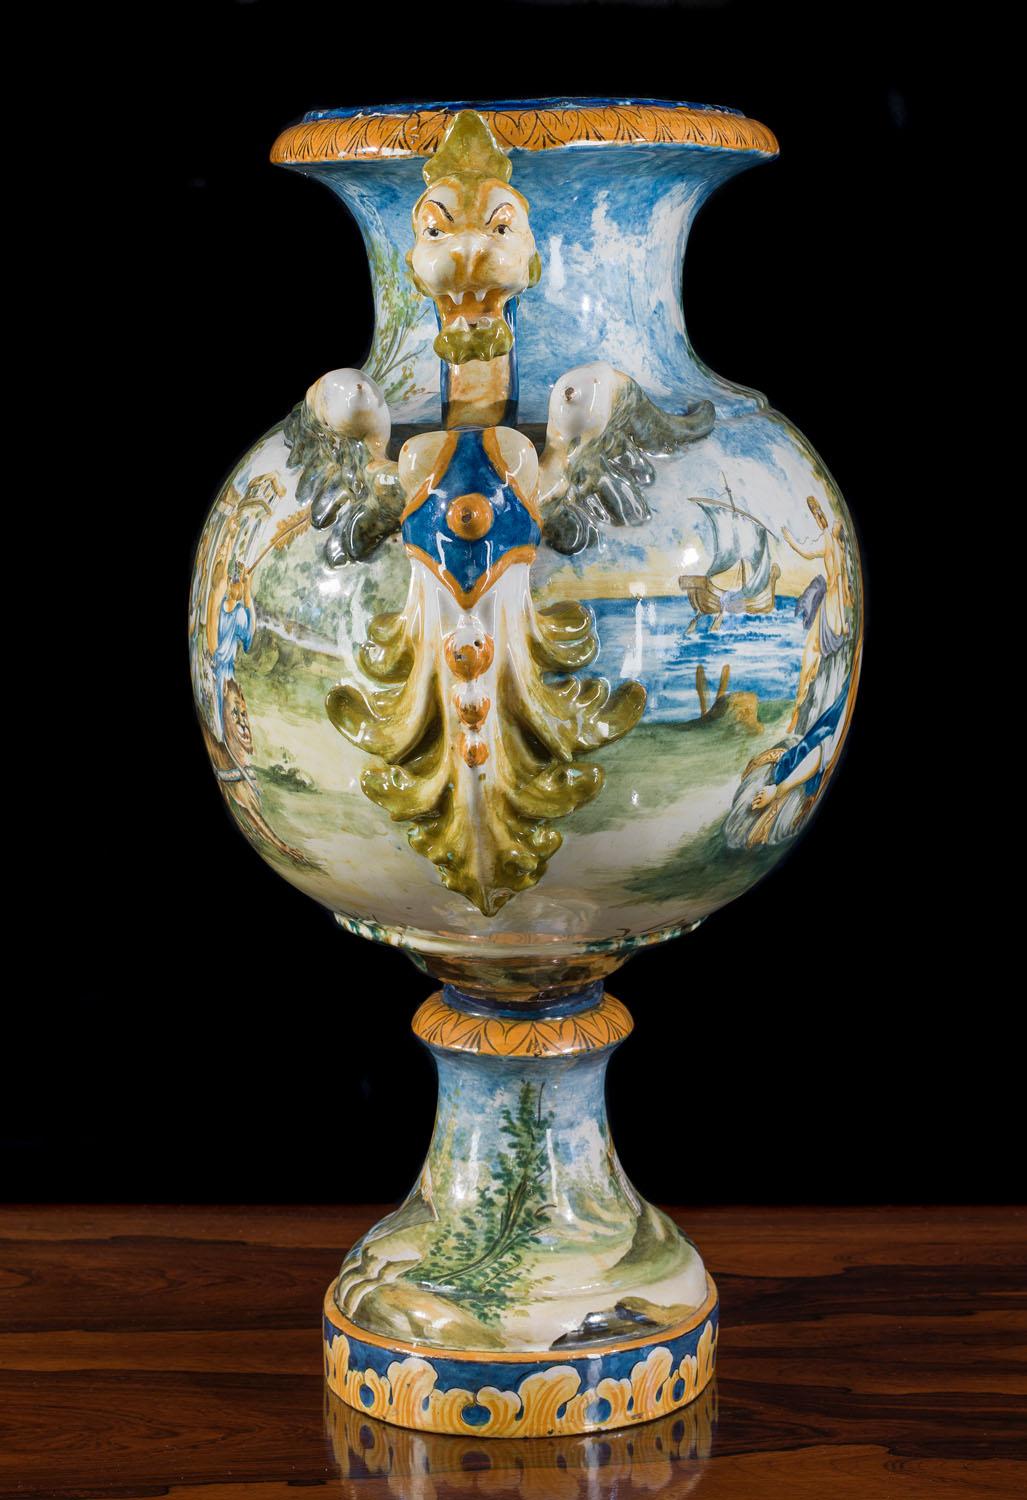 A very large 19th century twin handled maiolica vase in the form of a wine krater. The exquisite hand painted decoration includes two central cartouches, one depicting Bacchus and Ariadne reclining within an allegorical scene. Bacchus loosely hold